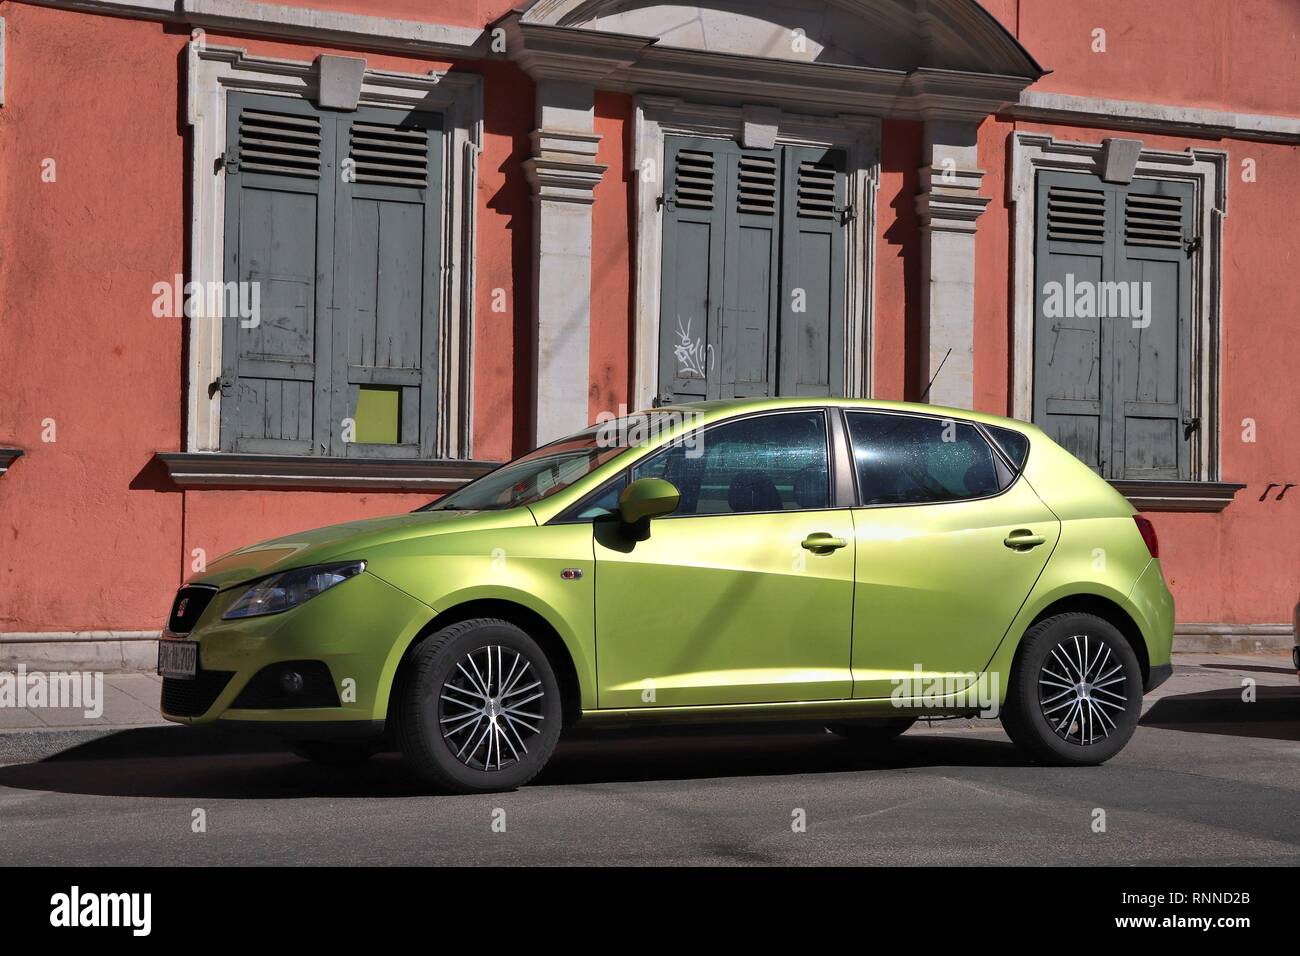 ERLANGEN, GERMANY - MAY 2018: Green Seat Ibiza compact hatchback car parked Germany. There were 45.8 million cars registered in Germany (as of 2 Stock Photo - Alamy